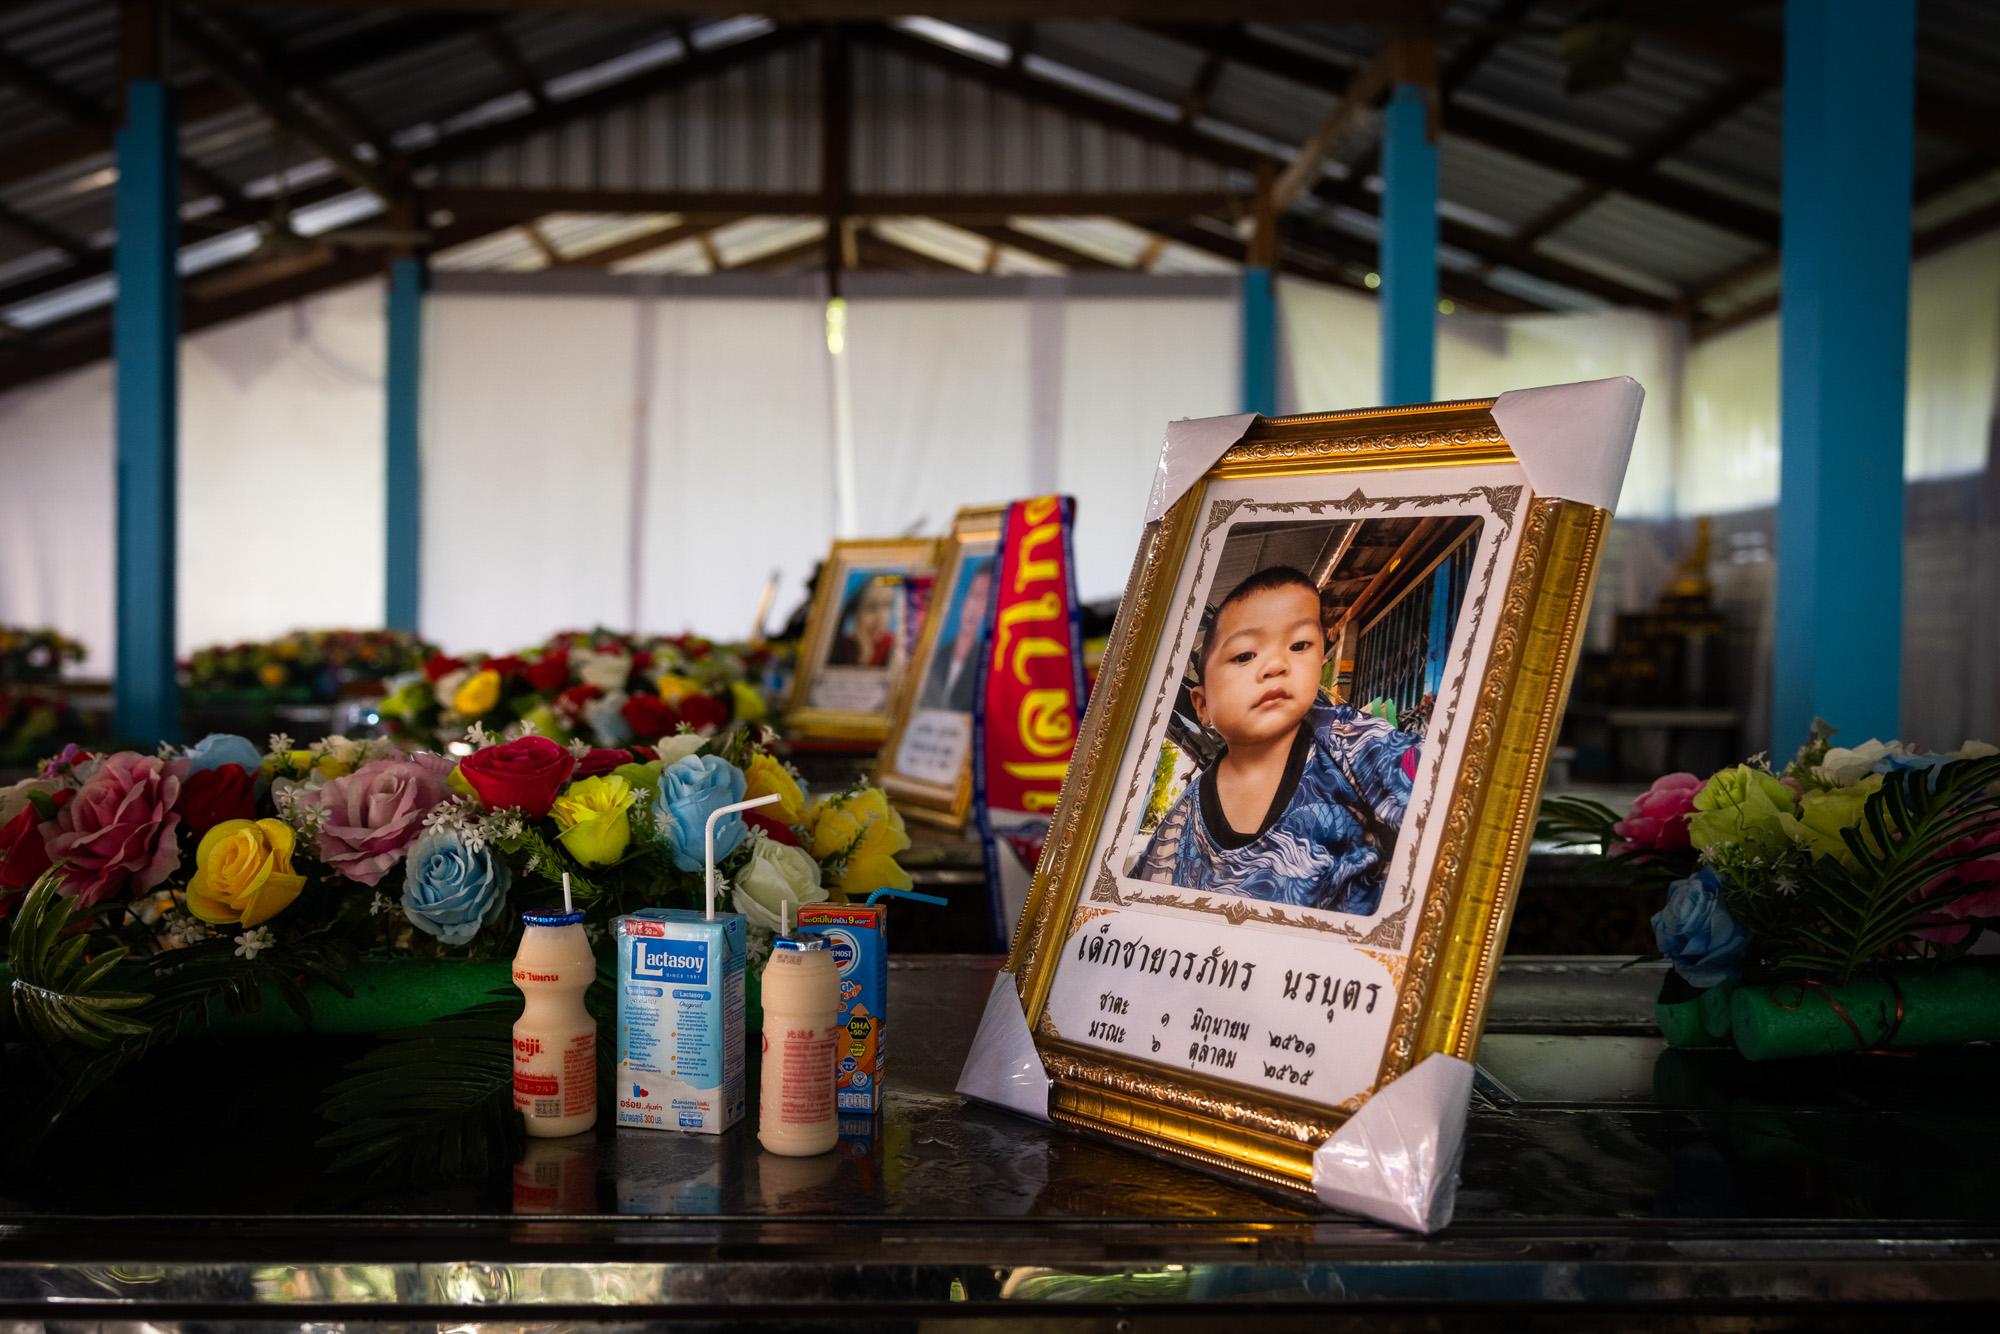 Shooting in Nong Bua Lamphu: The New York Times - A portrait of one of the child victims is seen on top of...